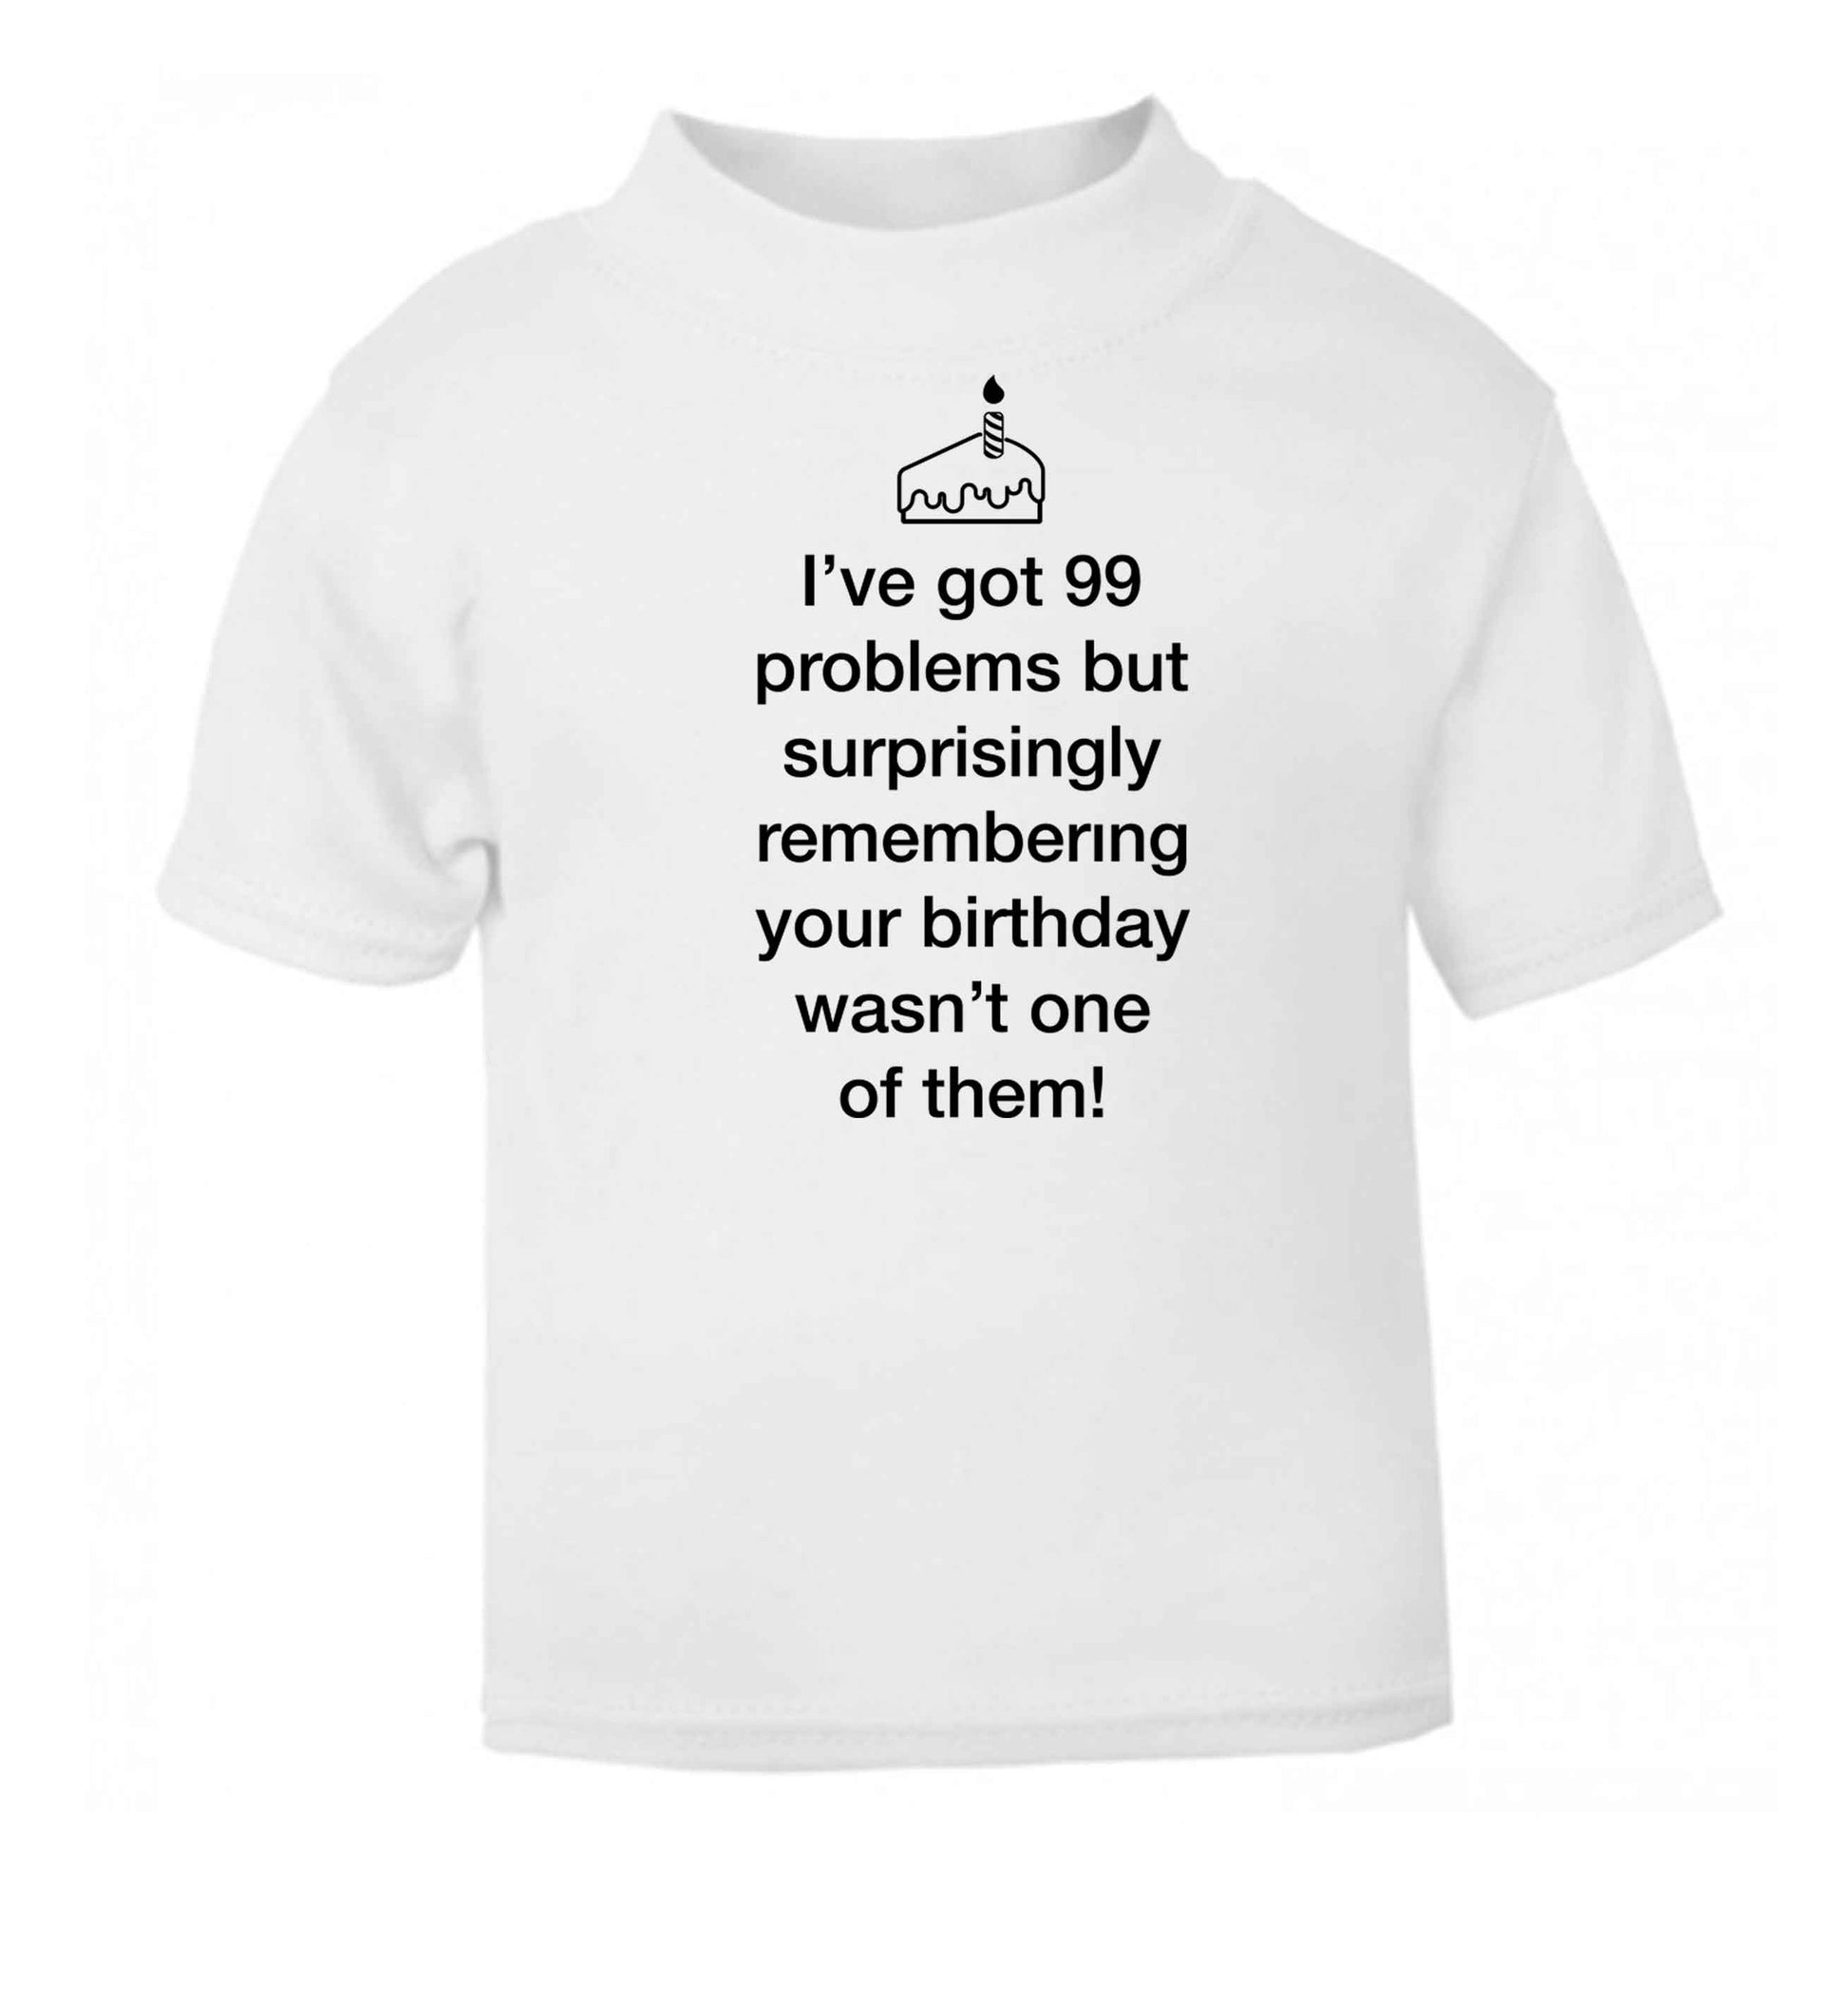 I've got 99 problems but surprisingly remembering your birthday wasn't one of them! white baby toddler Tshirt 2 Years